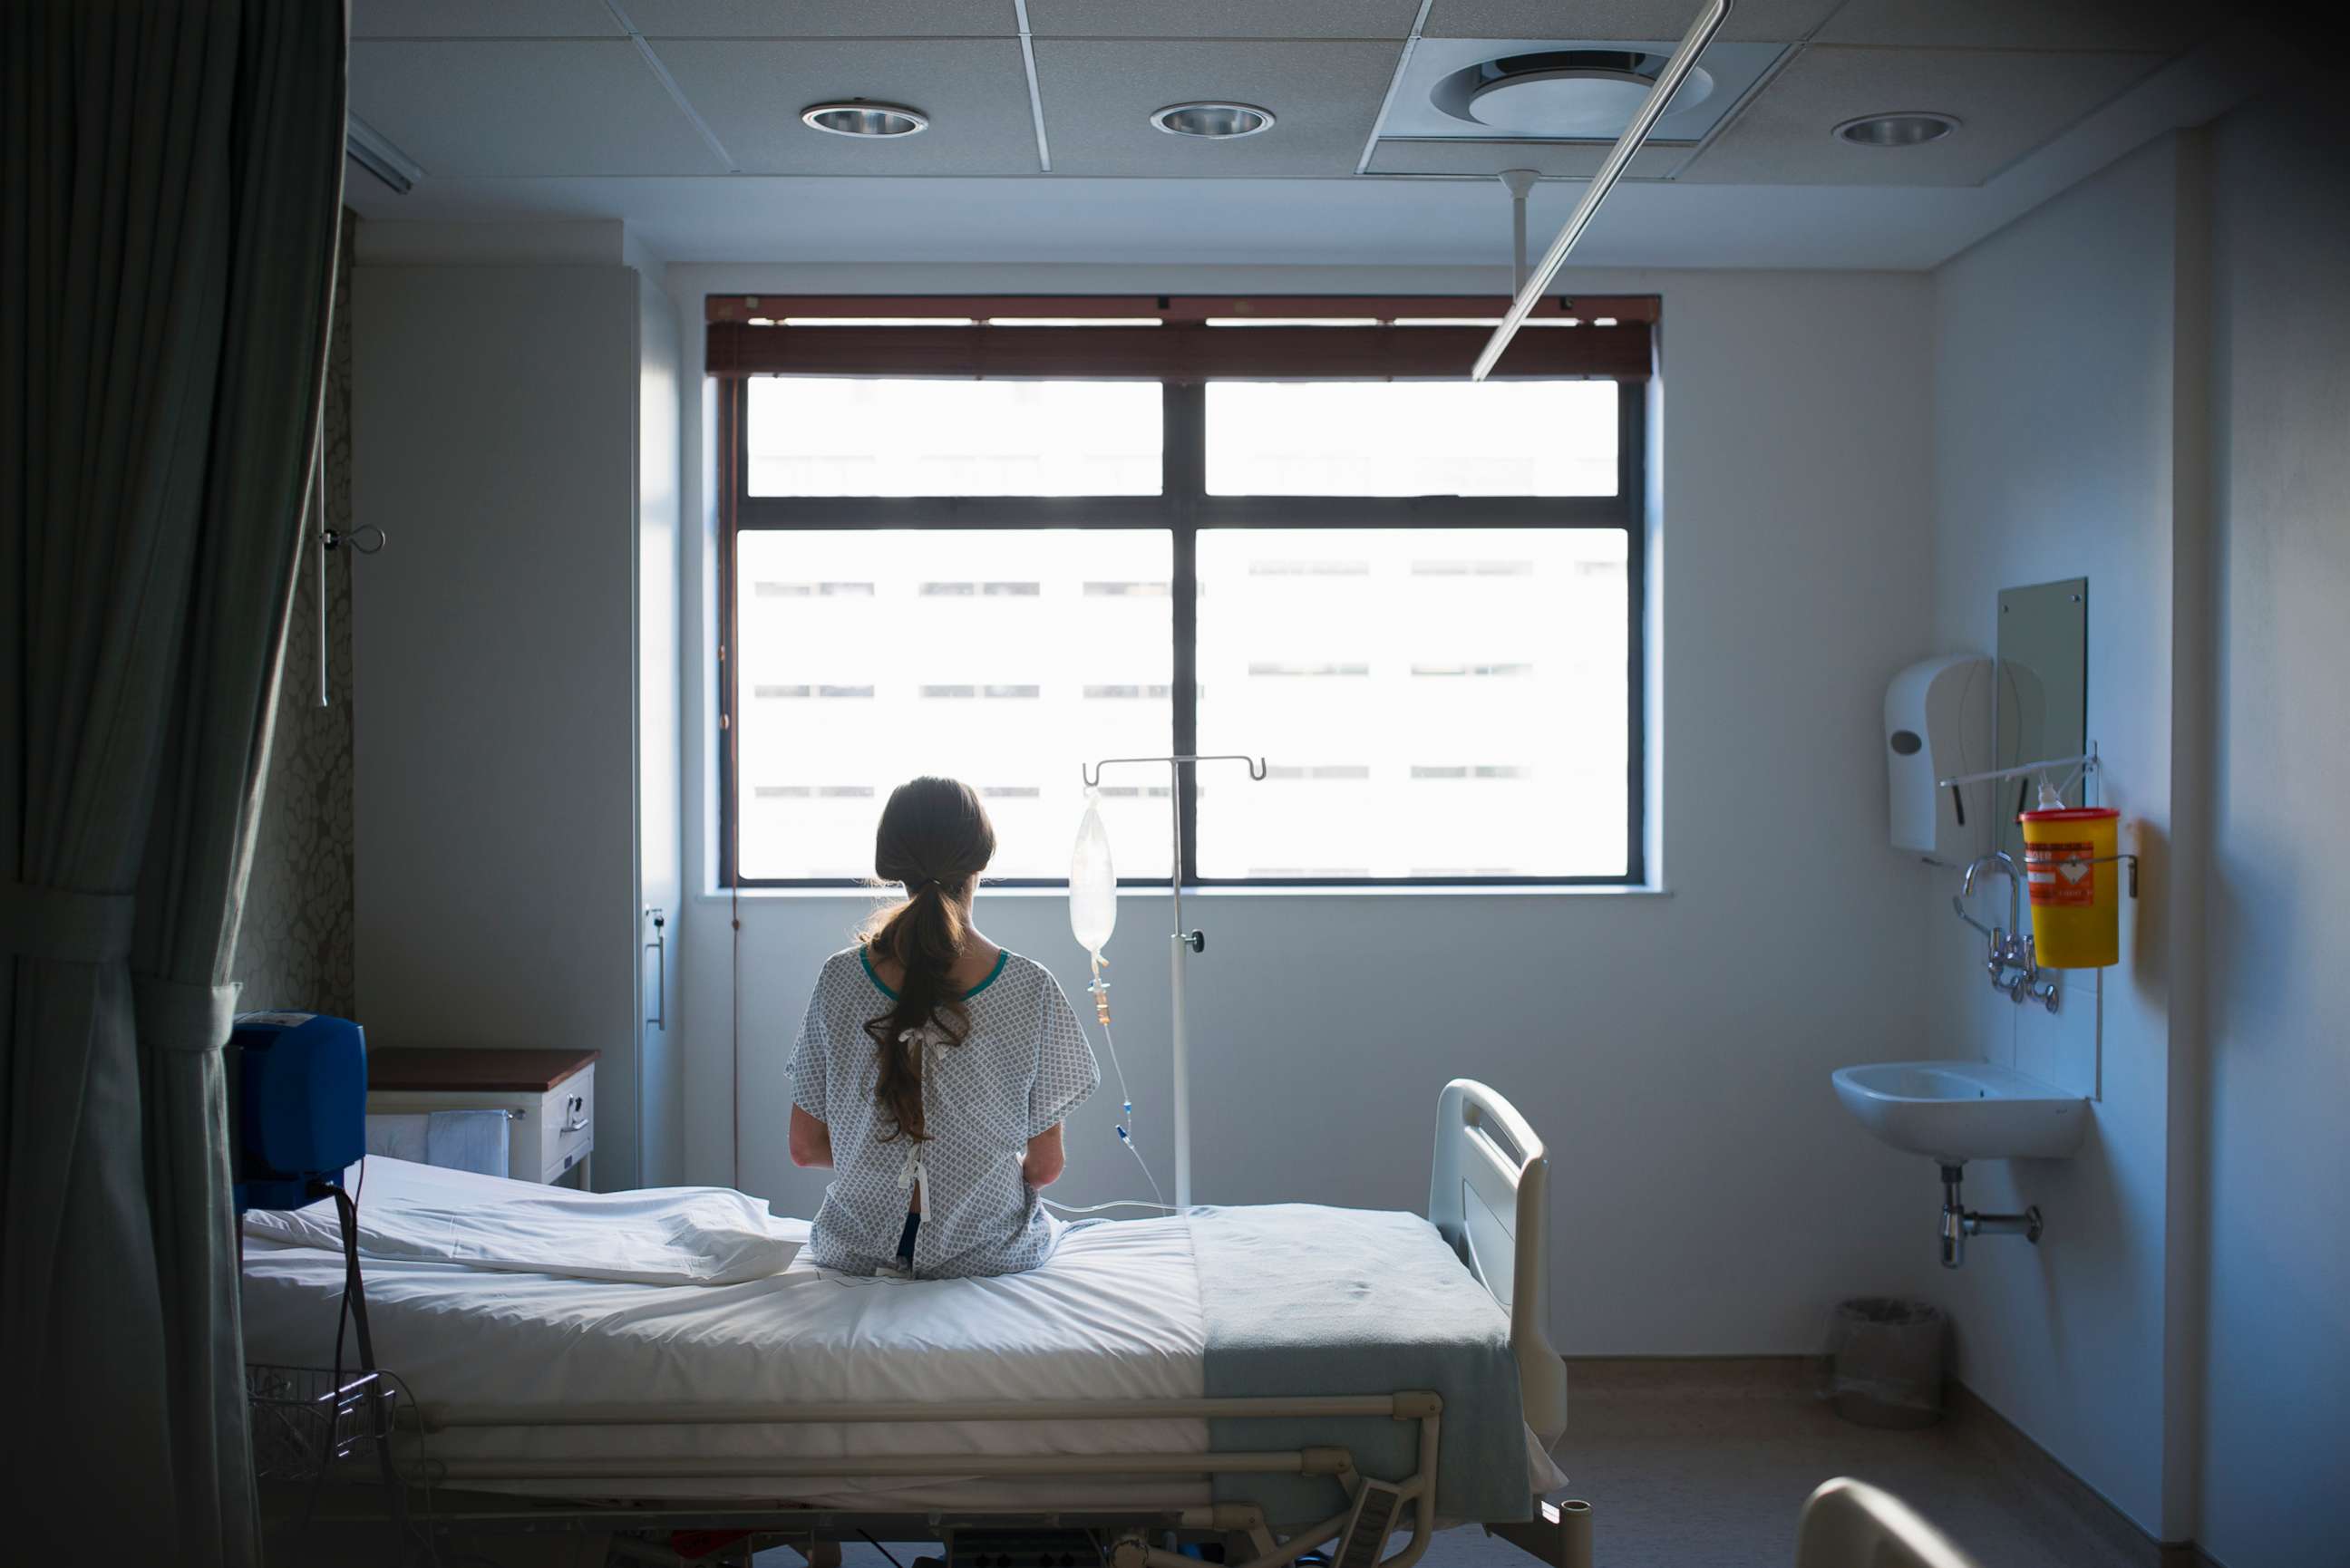 PHOTO: A patient sits on hospital bed in this undated stock photo.